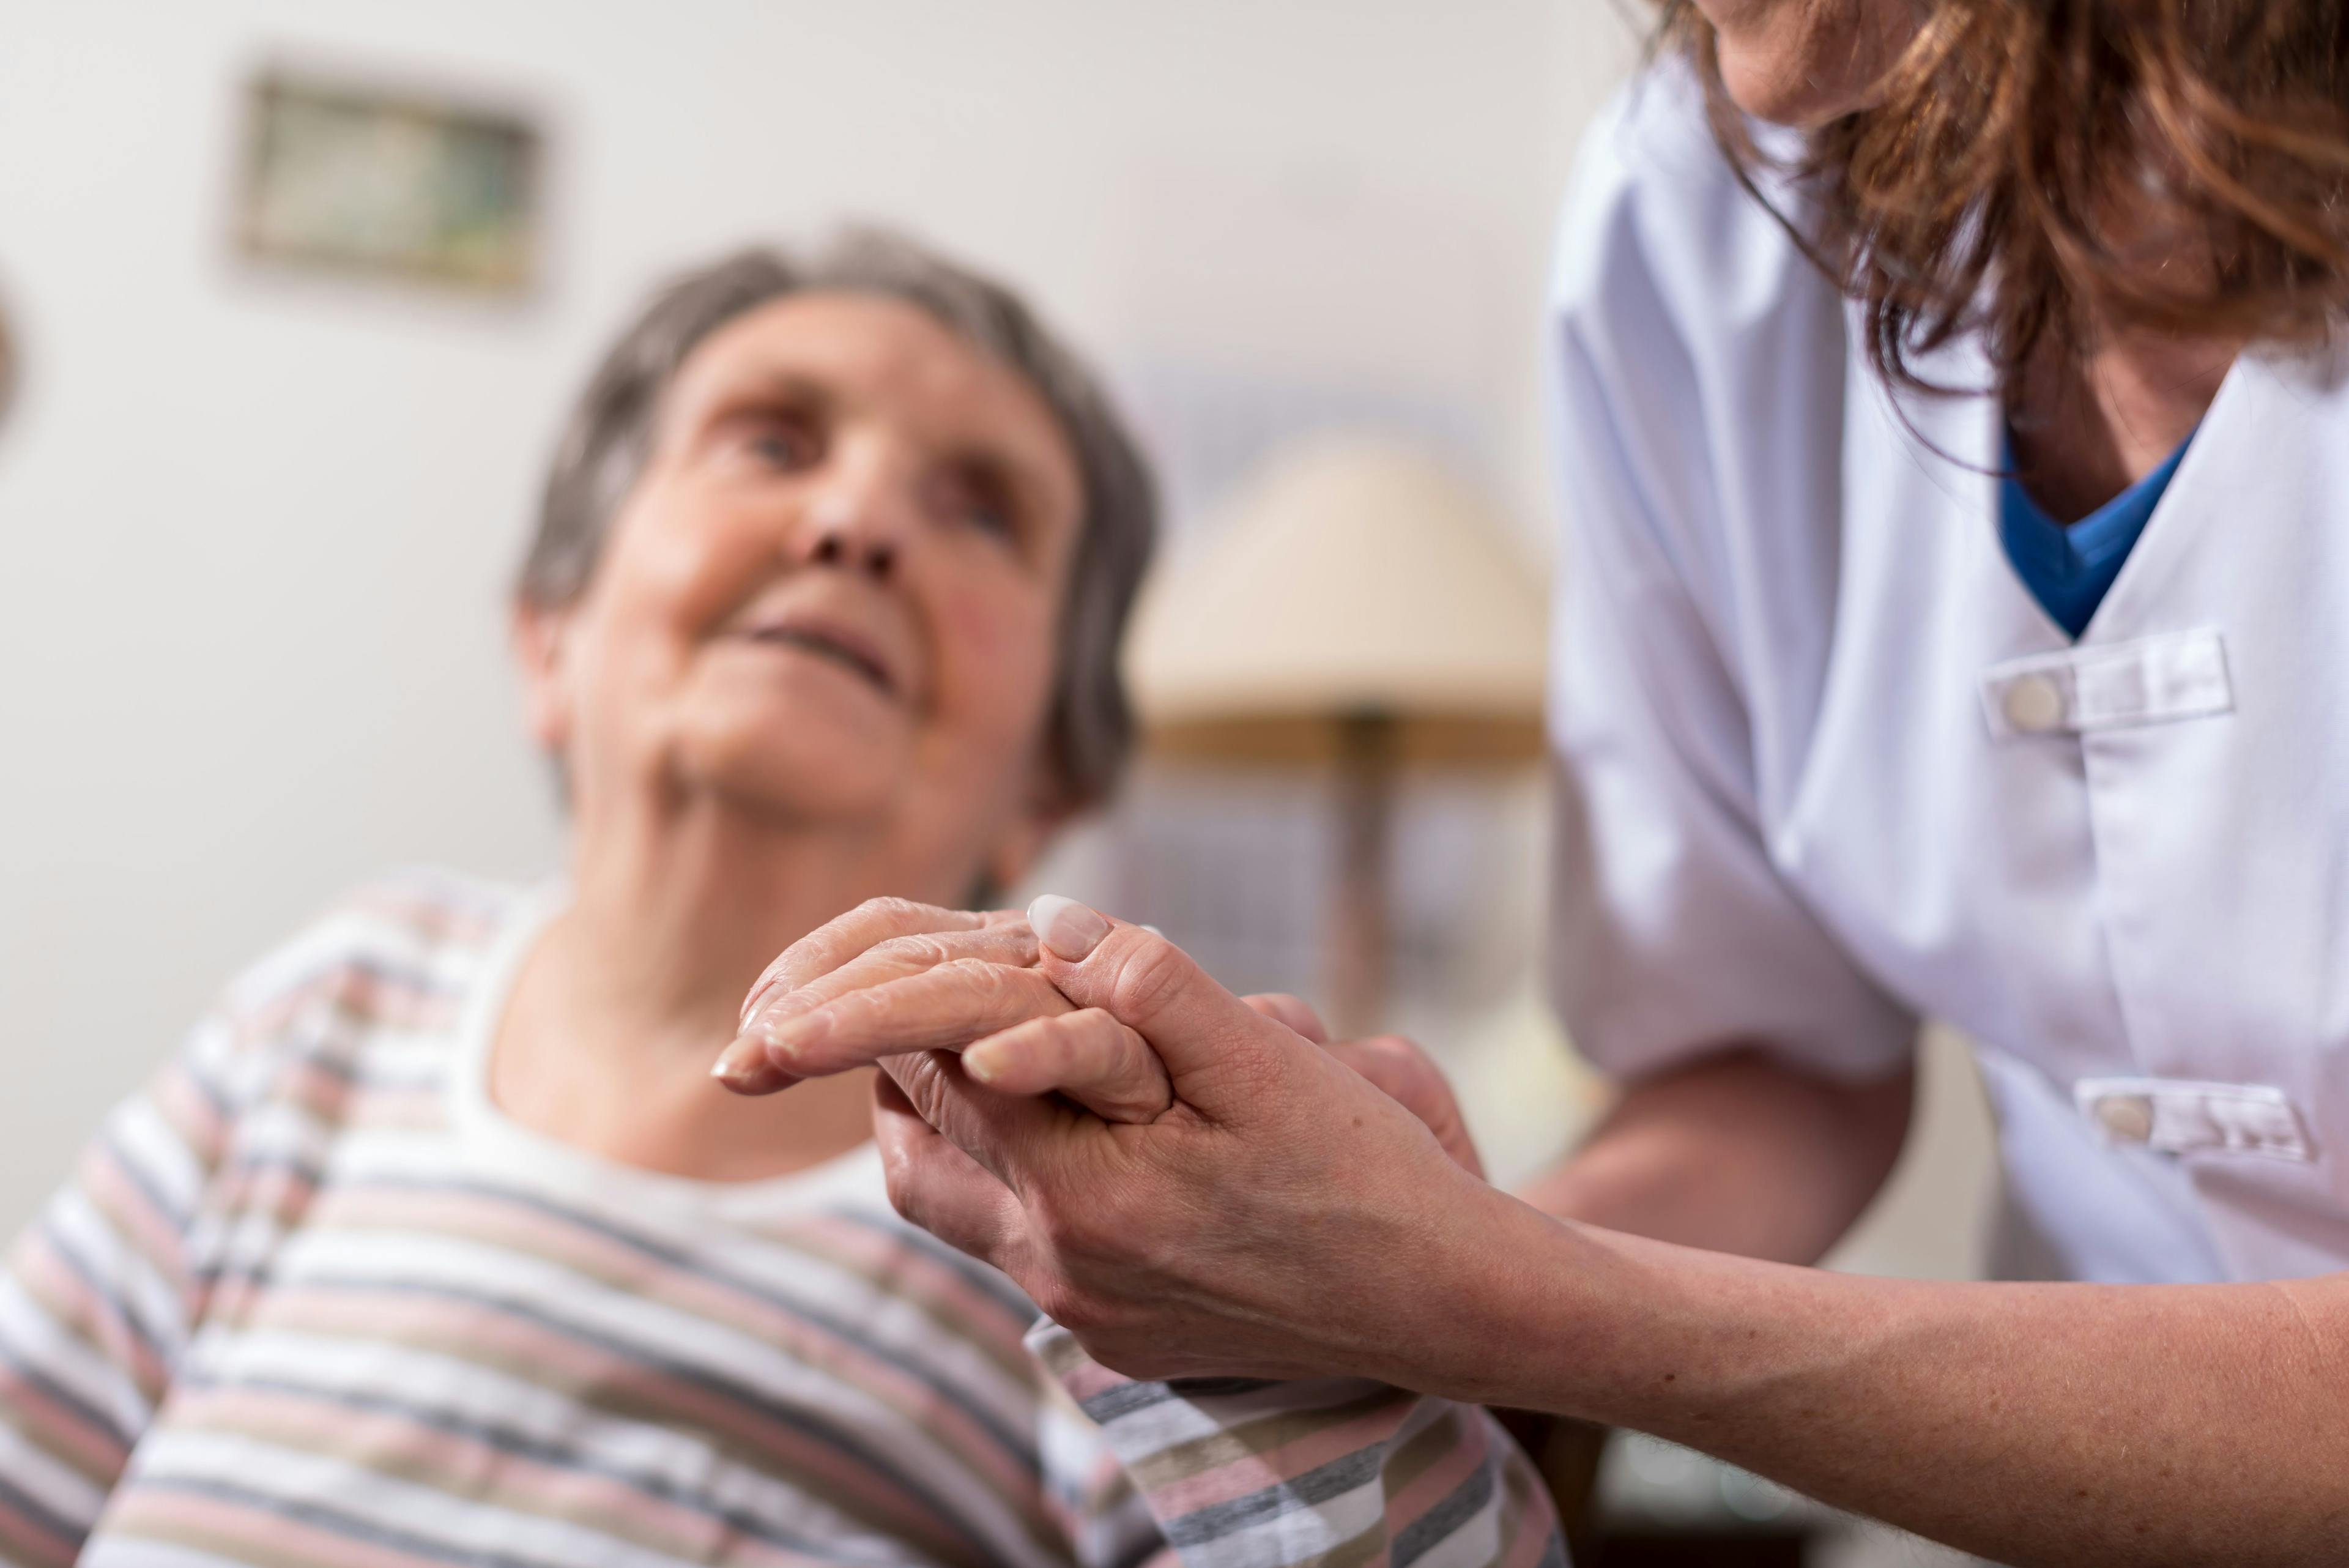 Feds unveil new staffing requirements for nursing homes: Impact and reactions